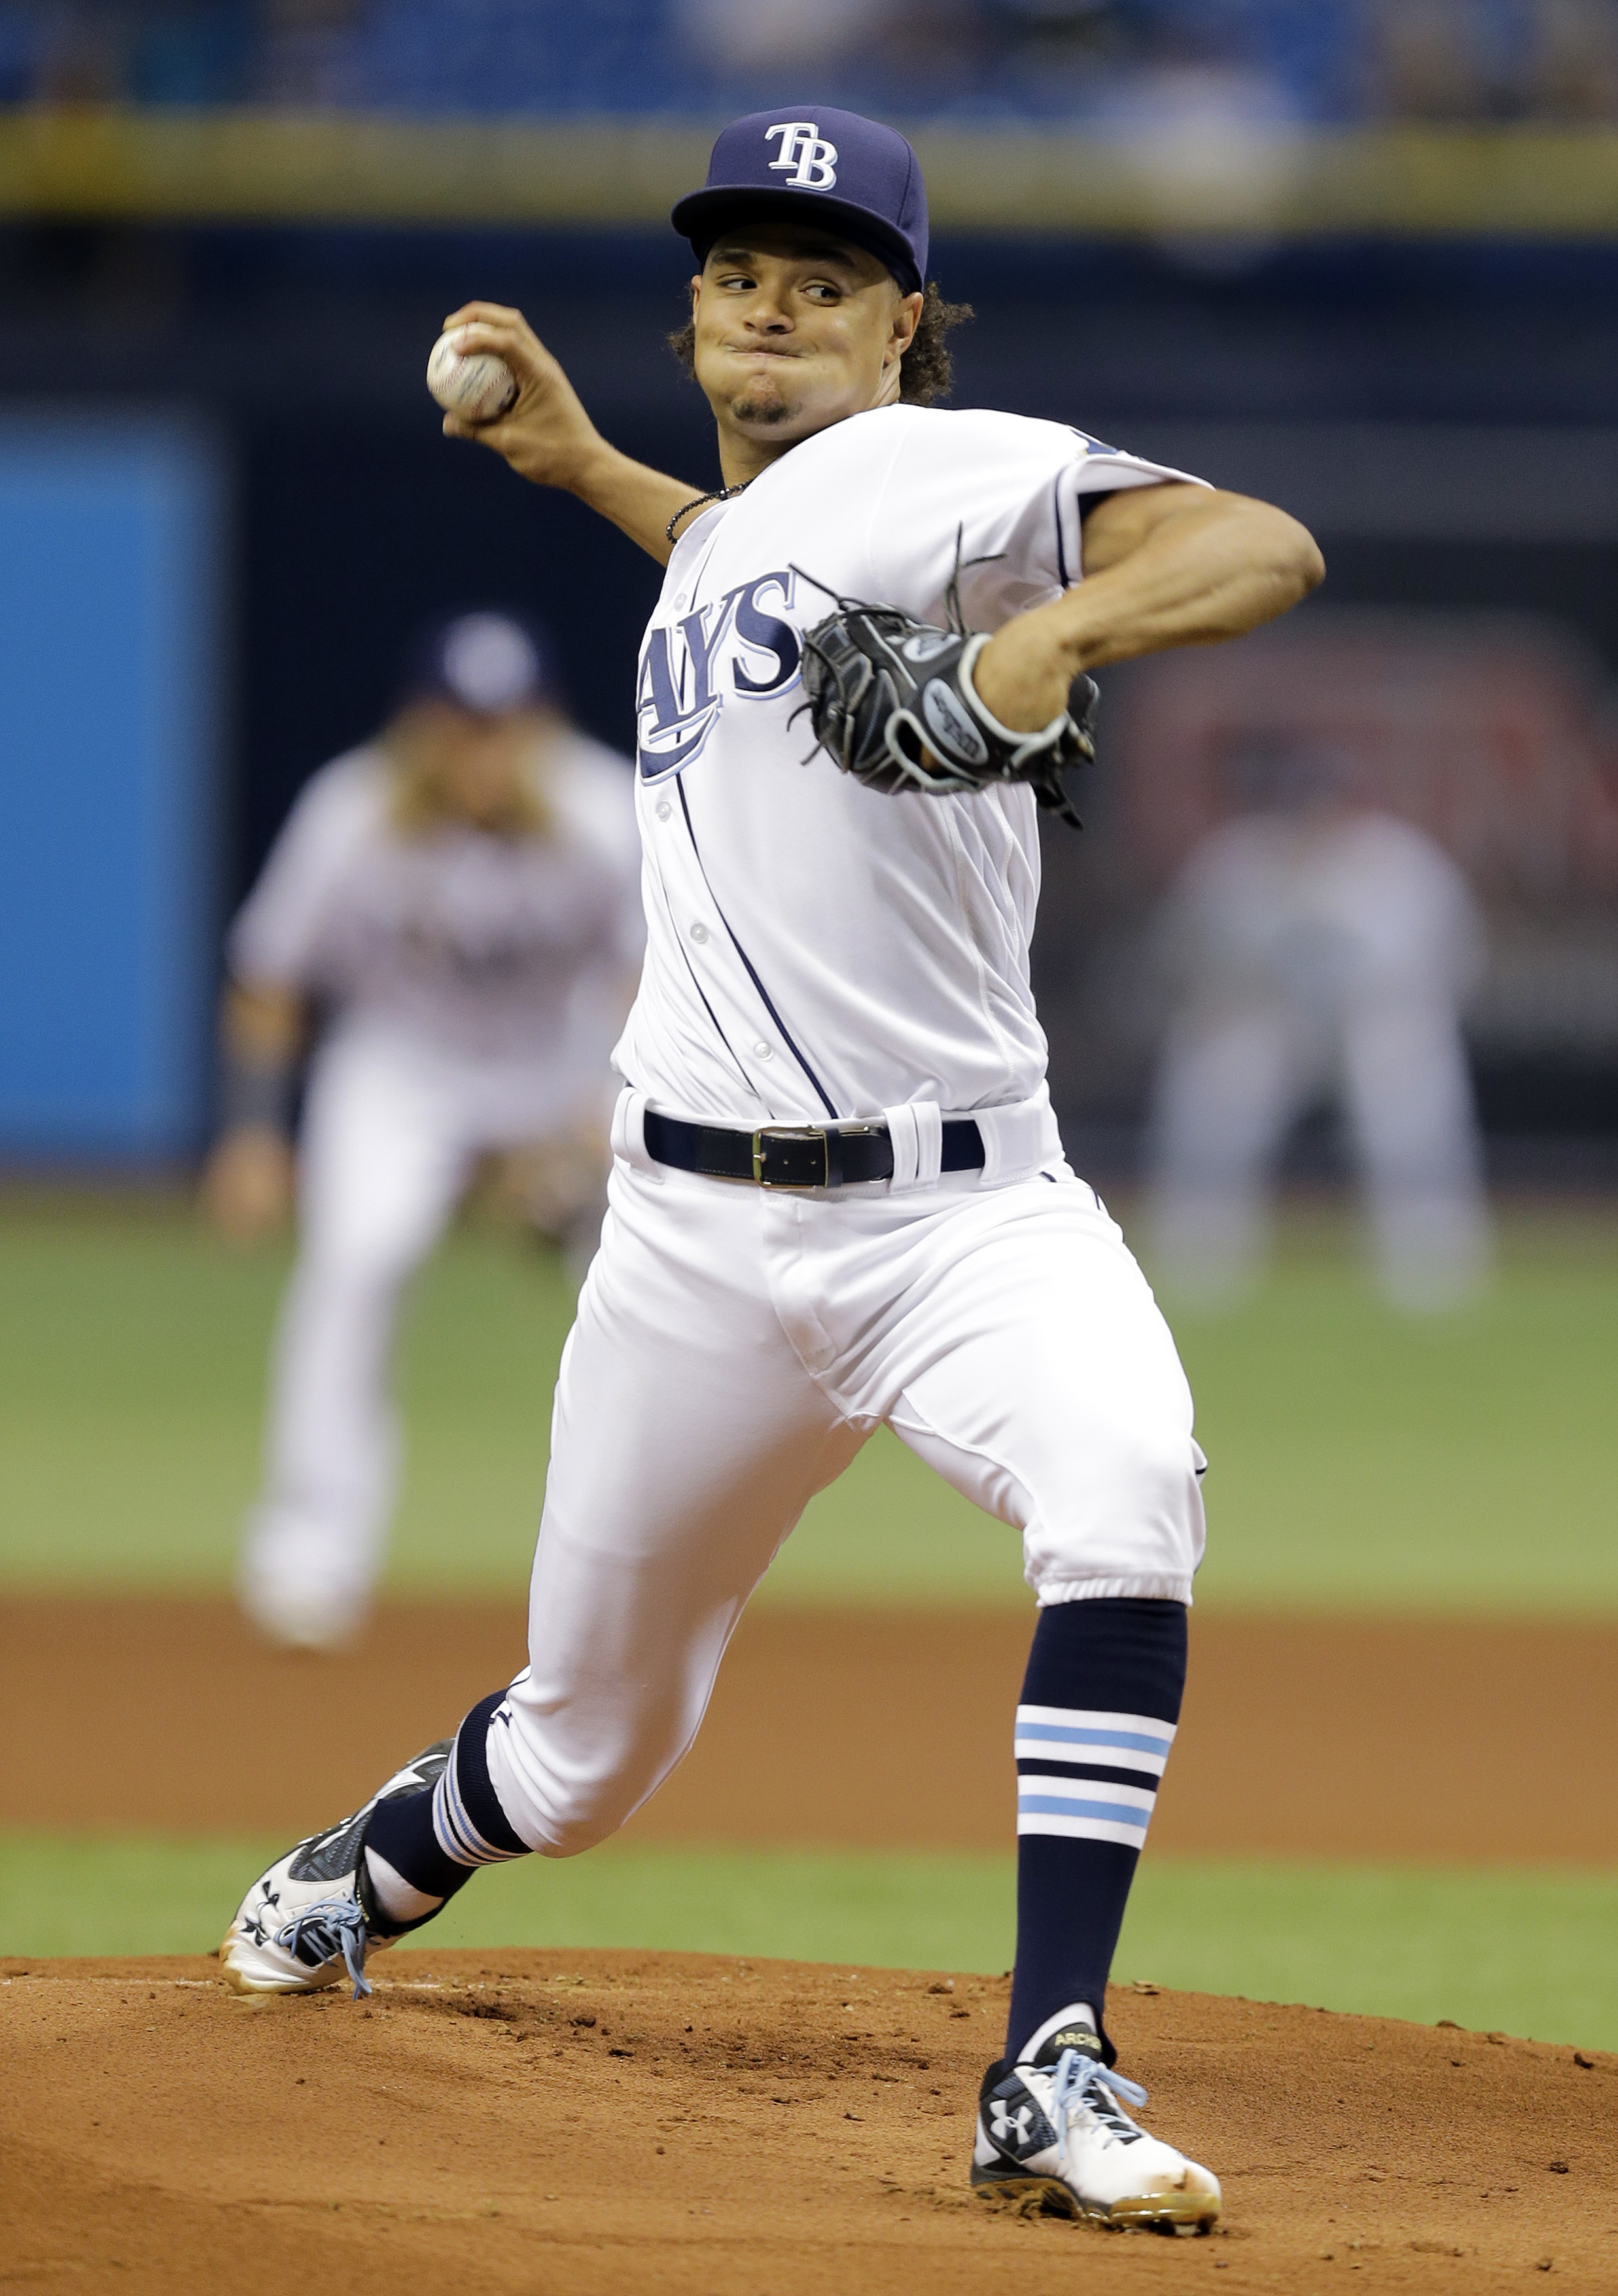 Errors costly as Yankees lose to Rays